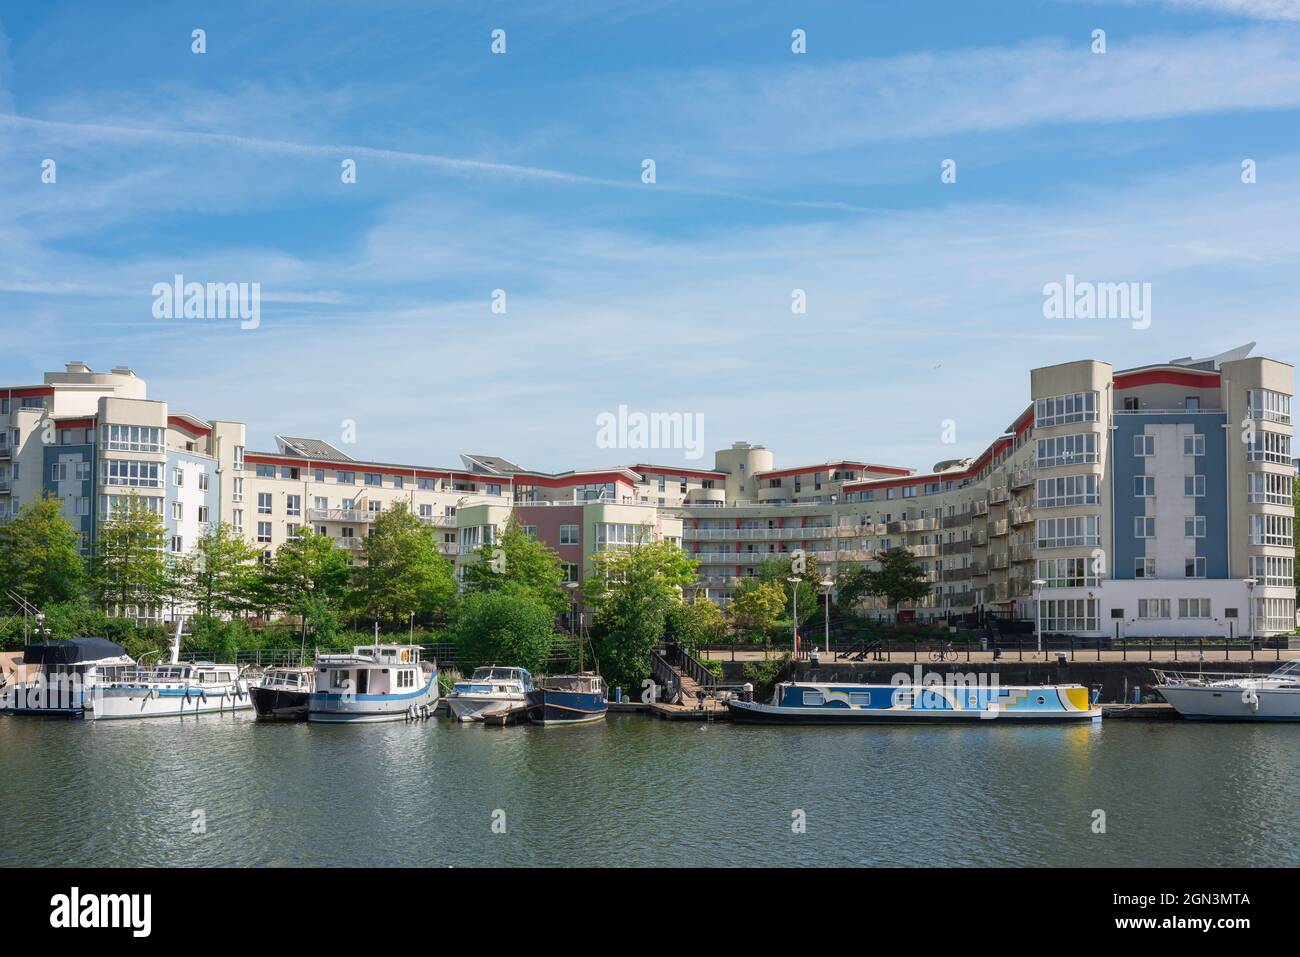 Bristol UK property, view of apartment buildings known as The Crescent sited in Hannover Quay in the Harbourside waterfront area of Bristol, England. Stock Photo